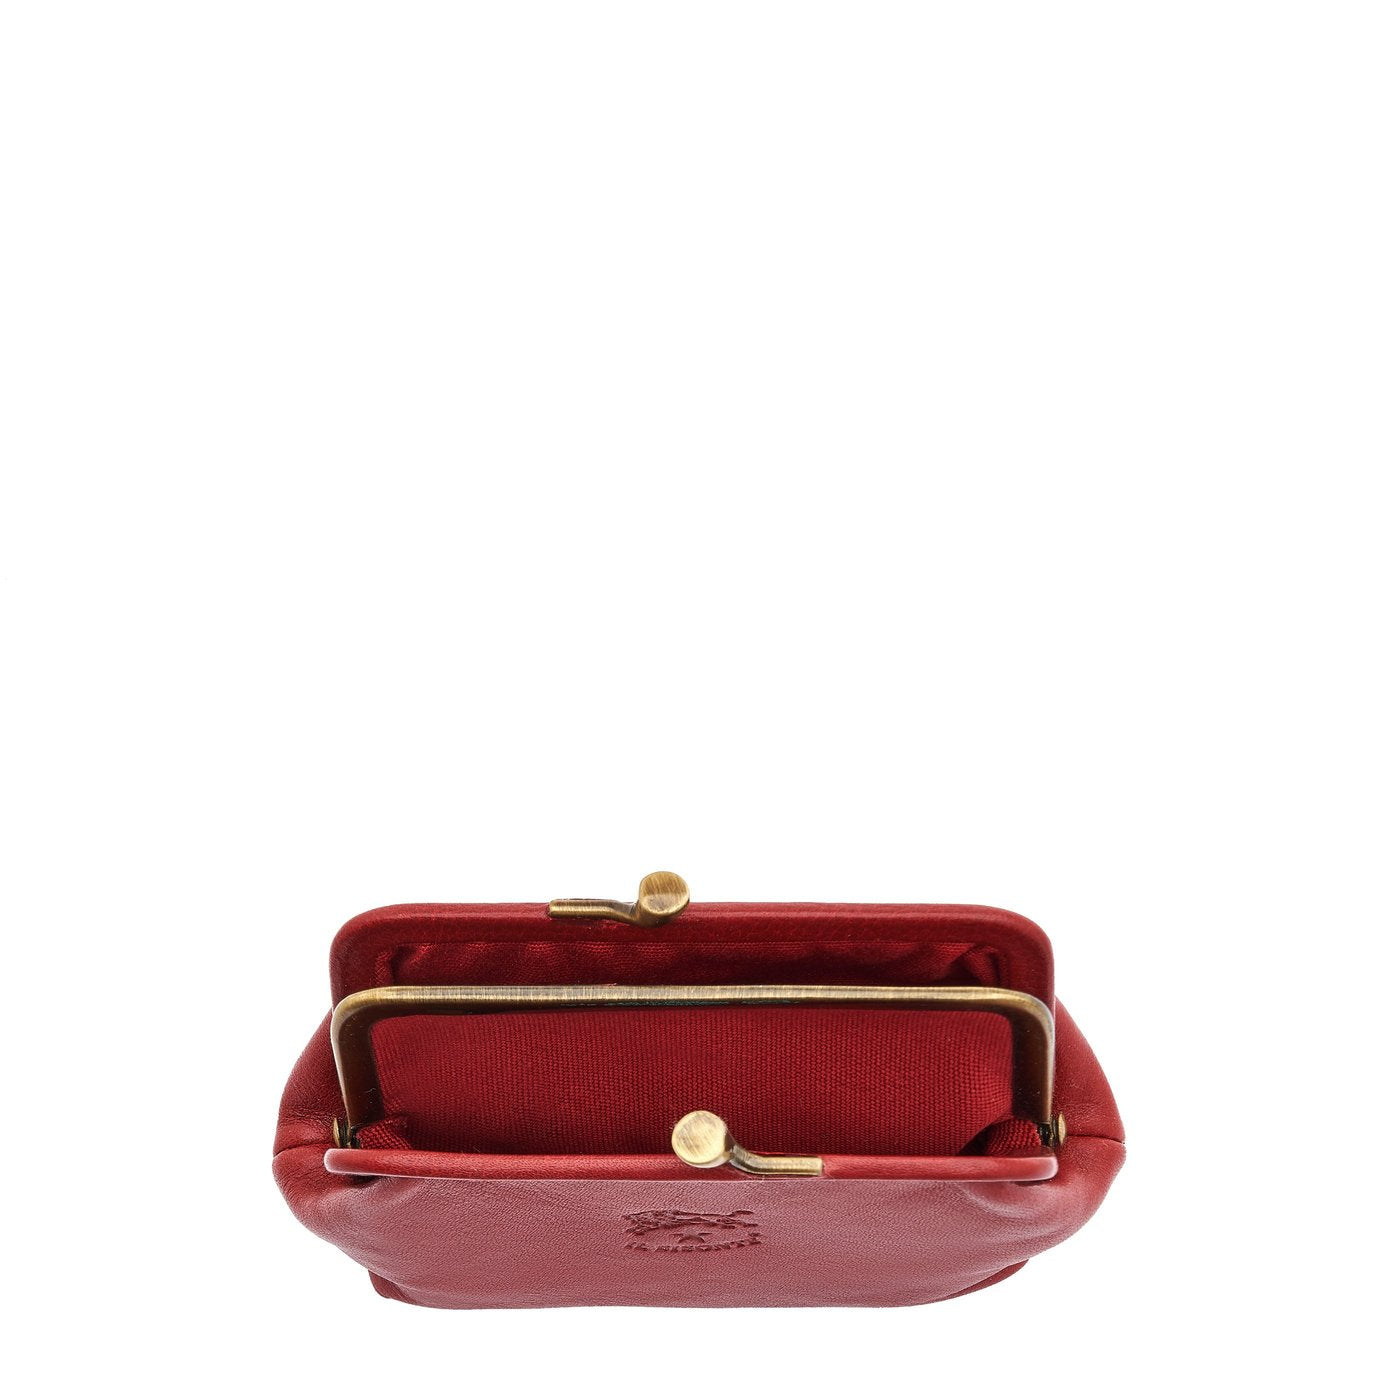 Women's Coin Purse in Calf Leather color Red